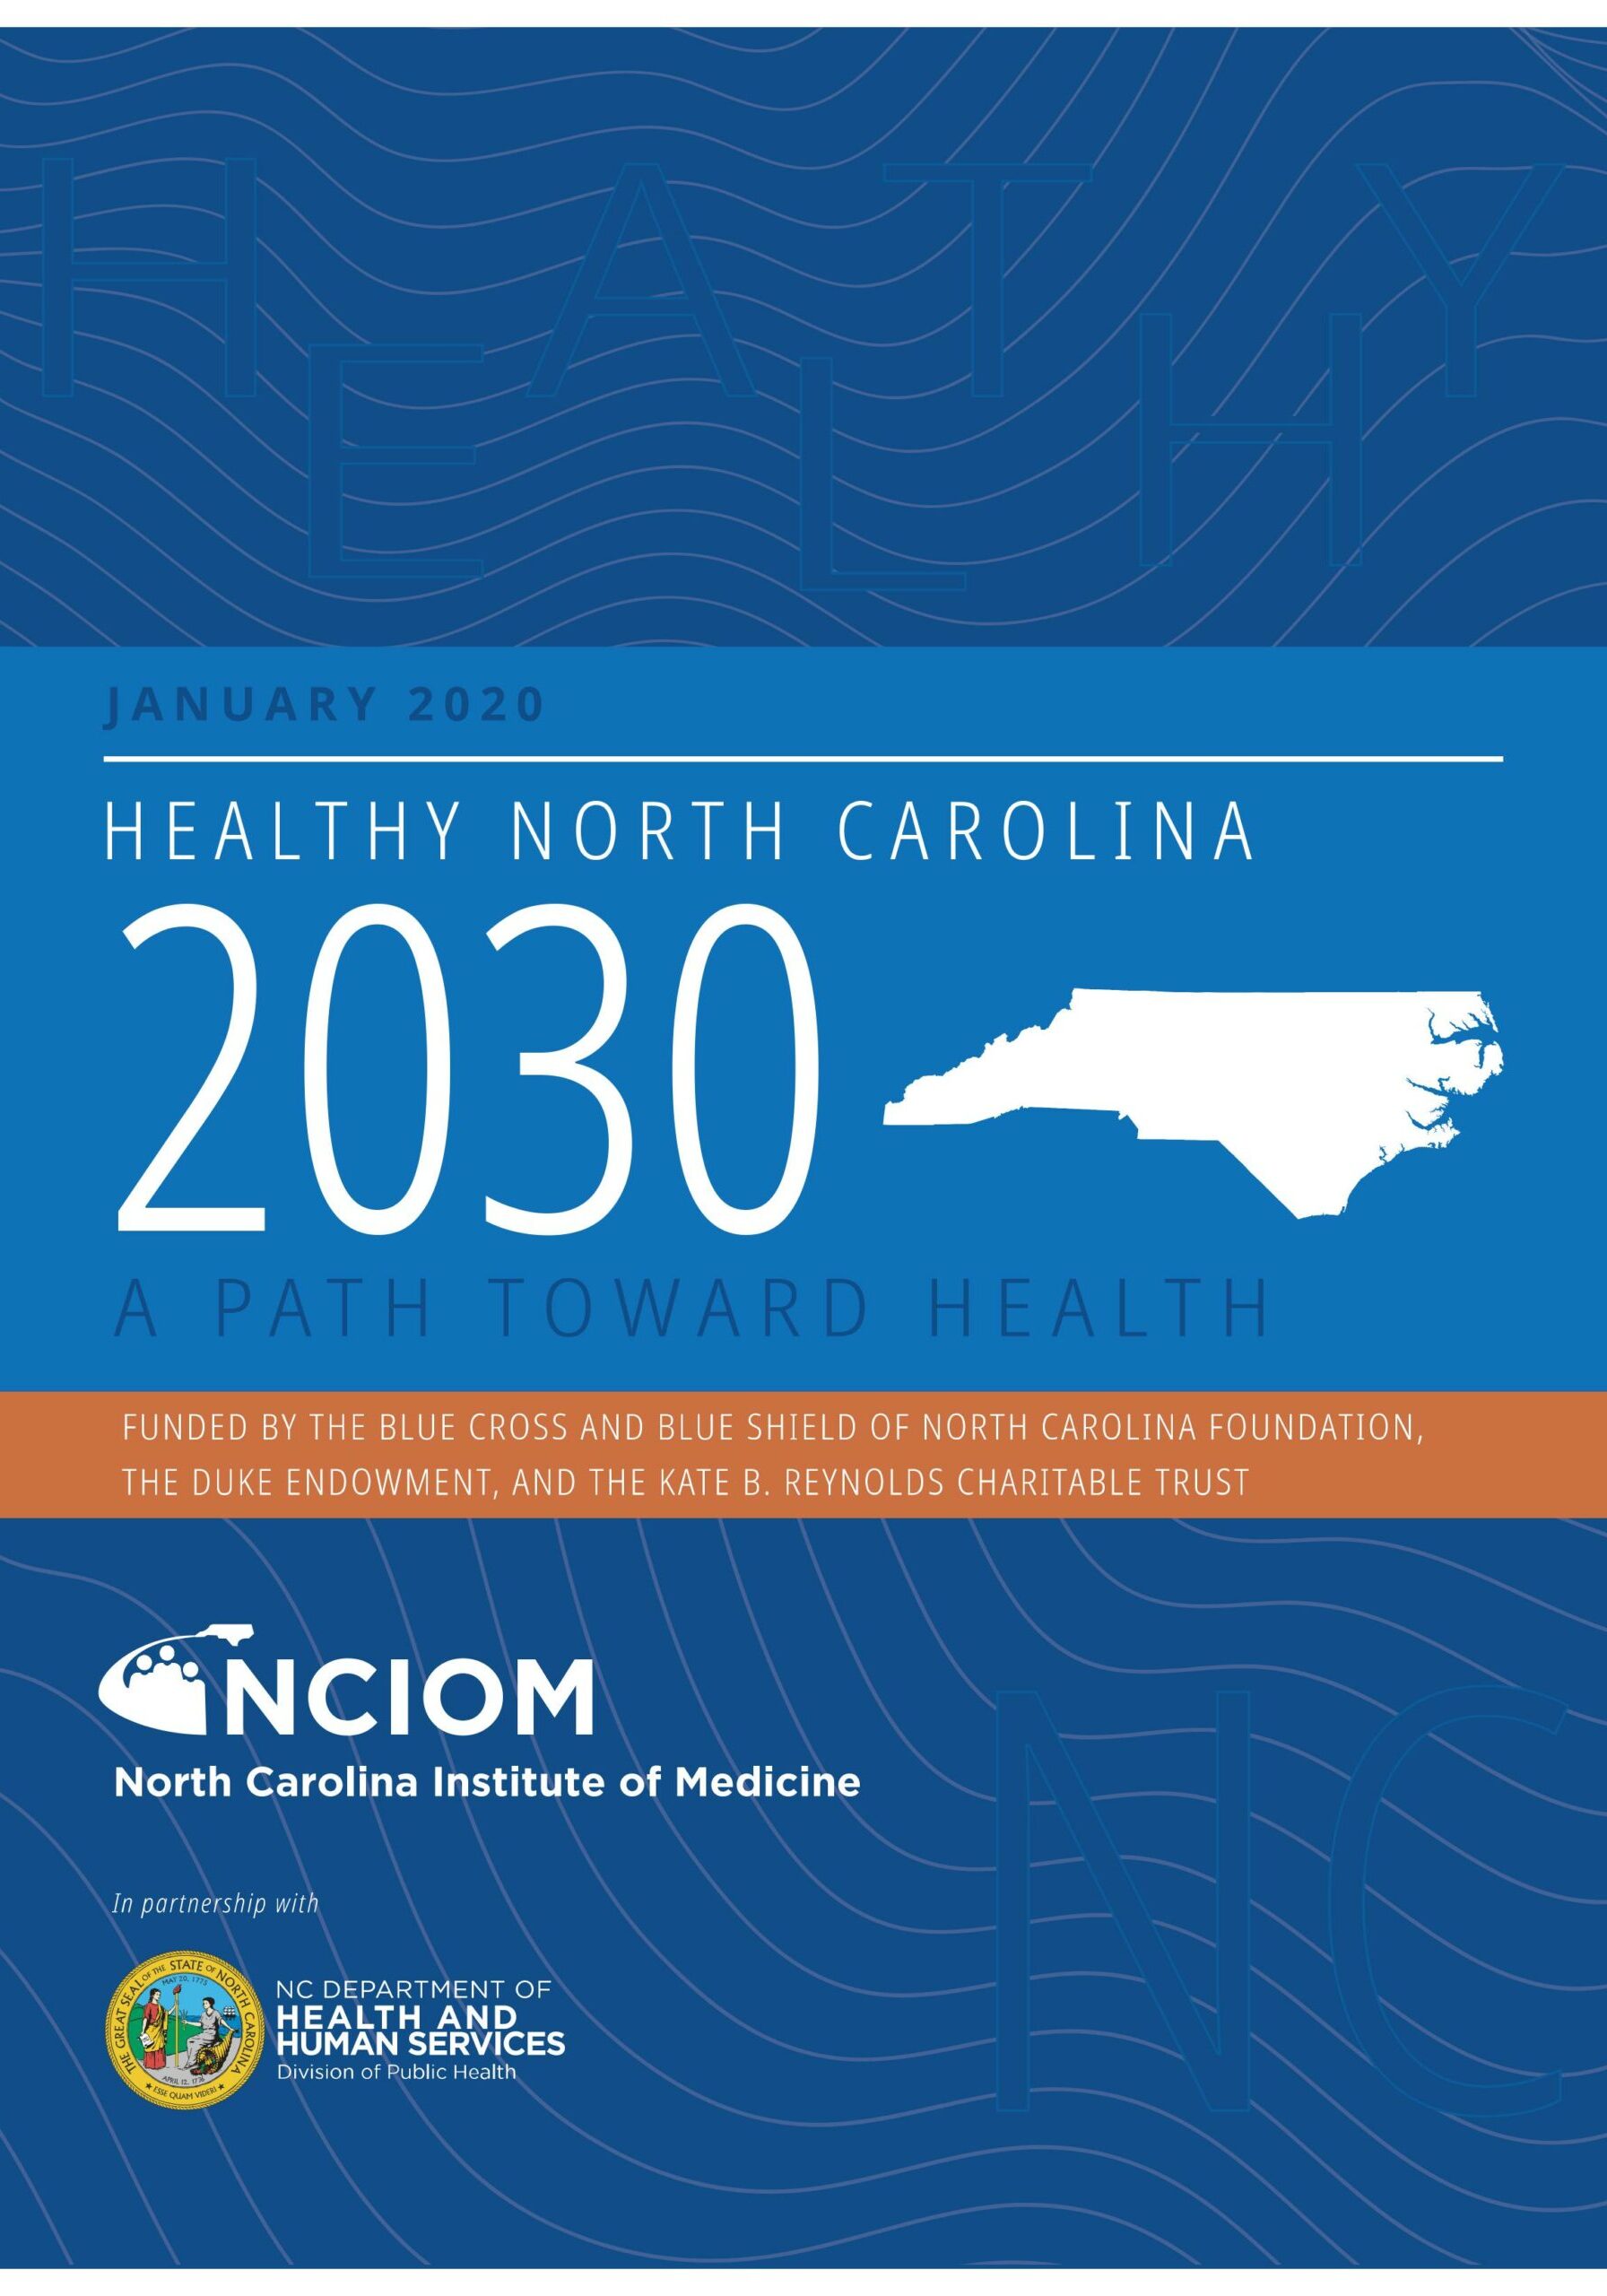 cover of HNC report that says Healthy North Carolina 2030 and has an image of the state